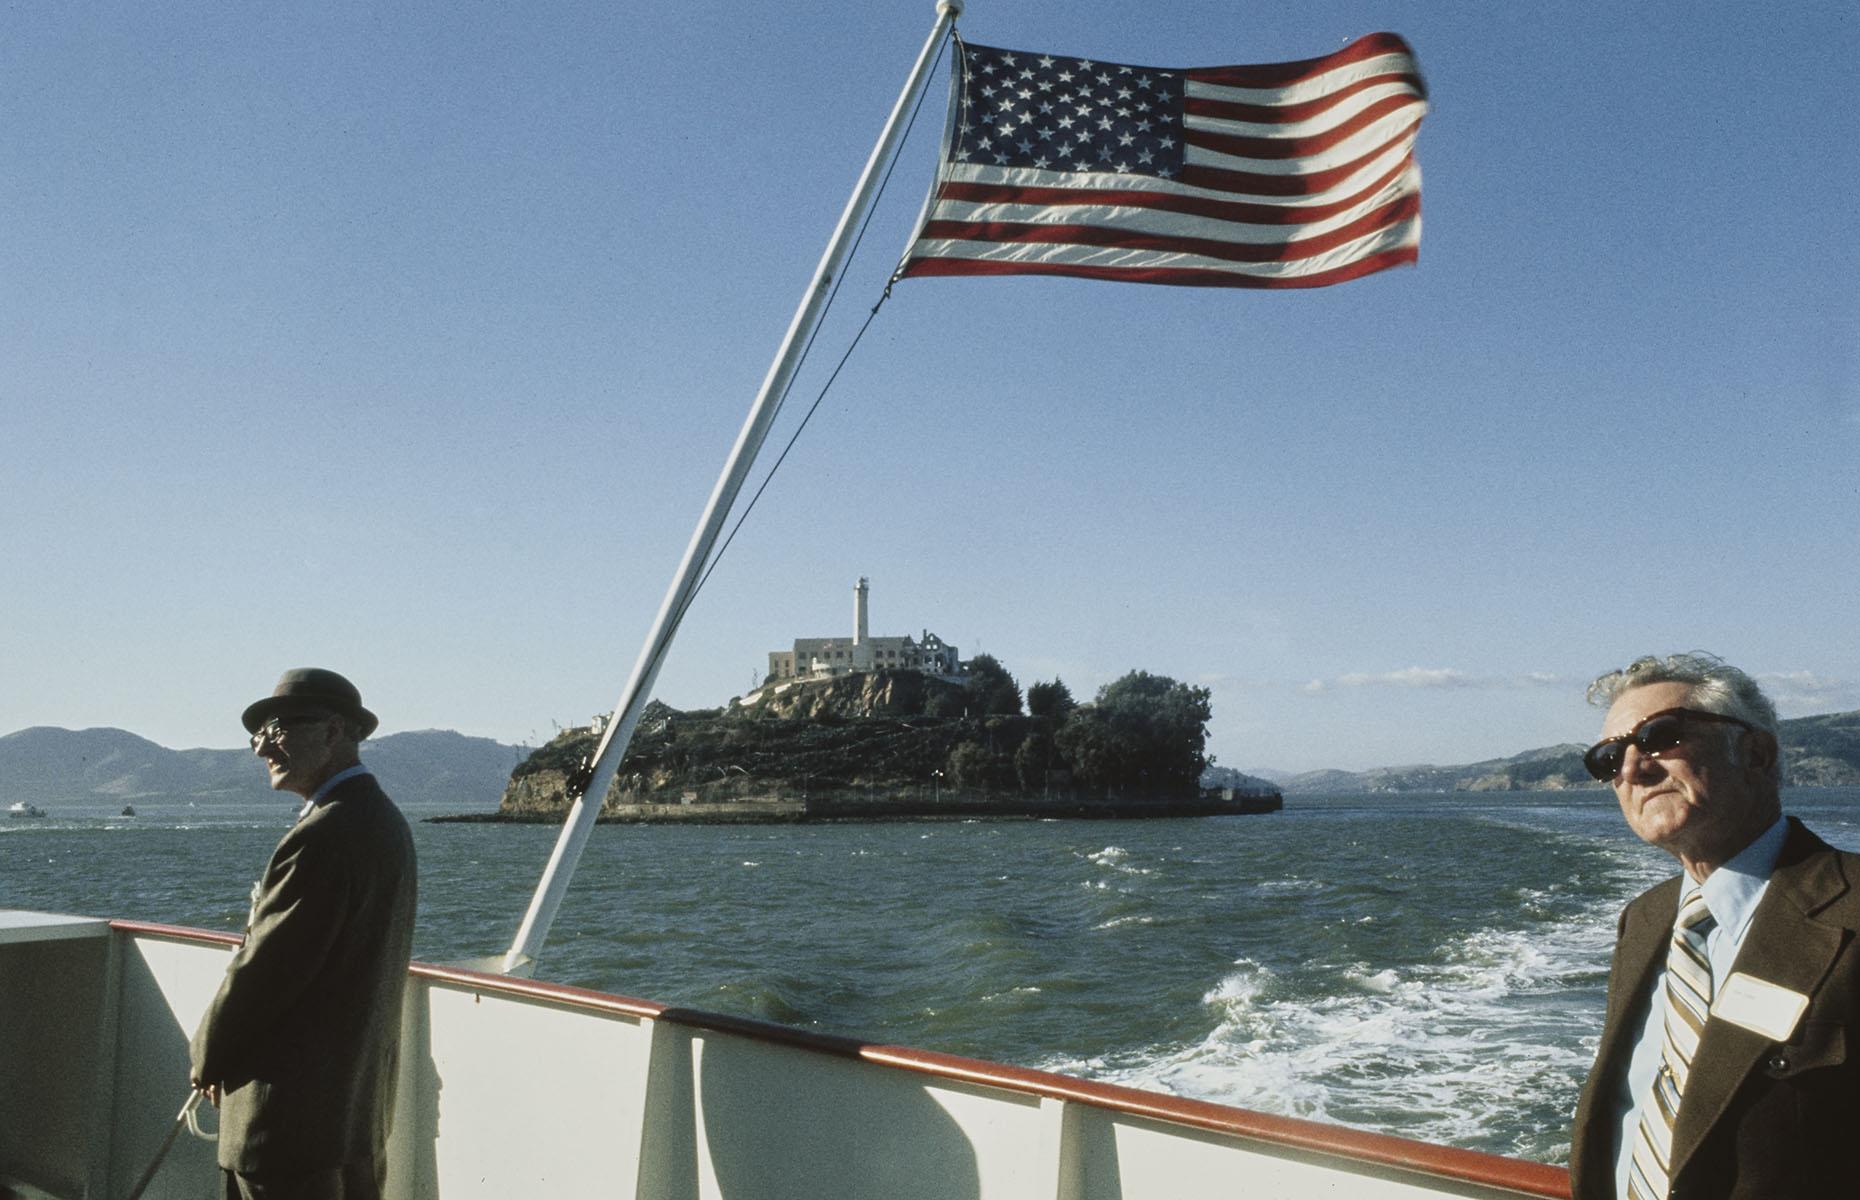 <p>Alcatraz eventually came under the control of the National Park Service in the 1970s. It was first enlisted as a National Recreation Area in 1972 and then opened to the public in 1973.</p>